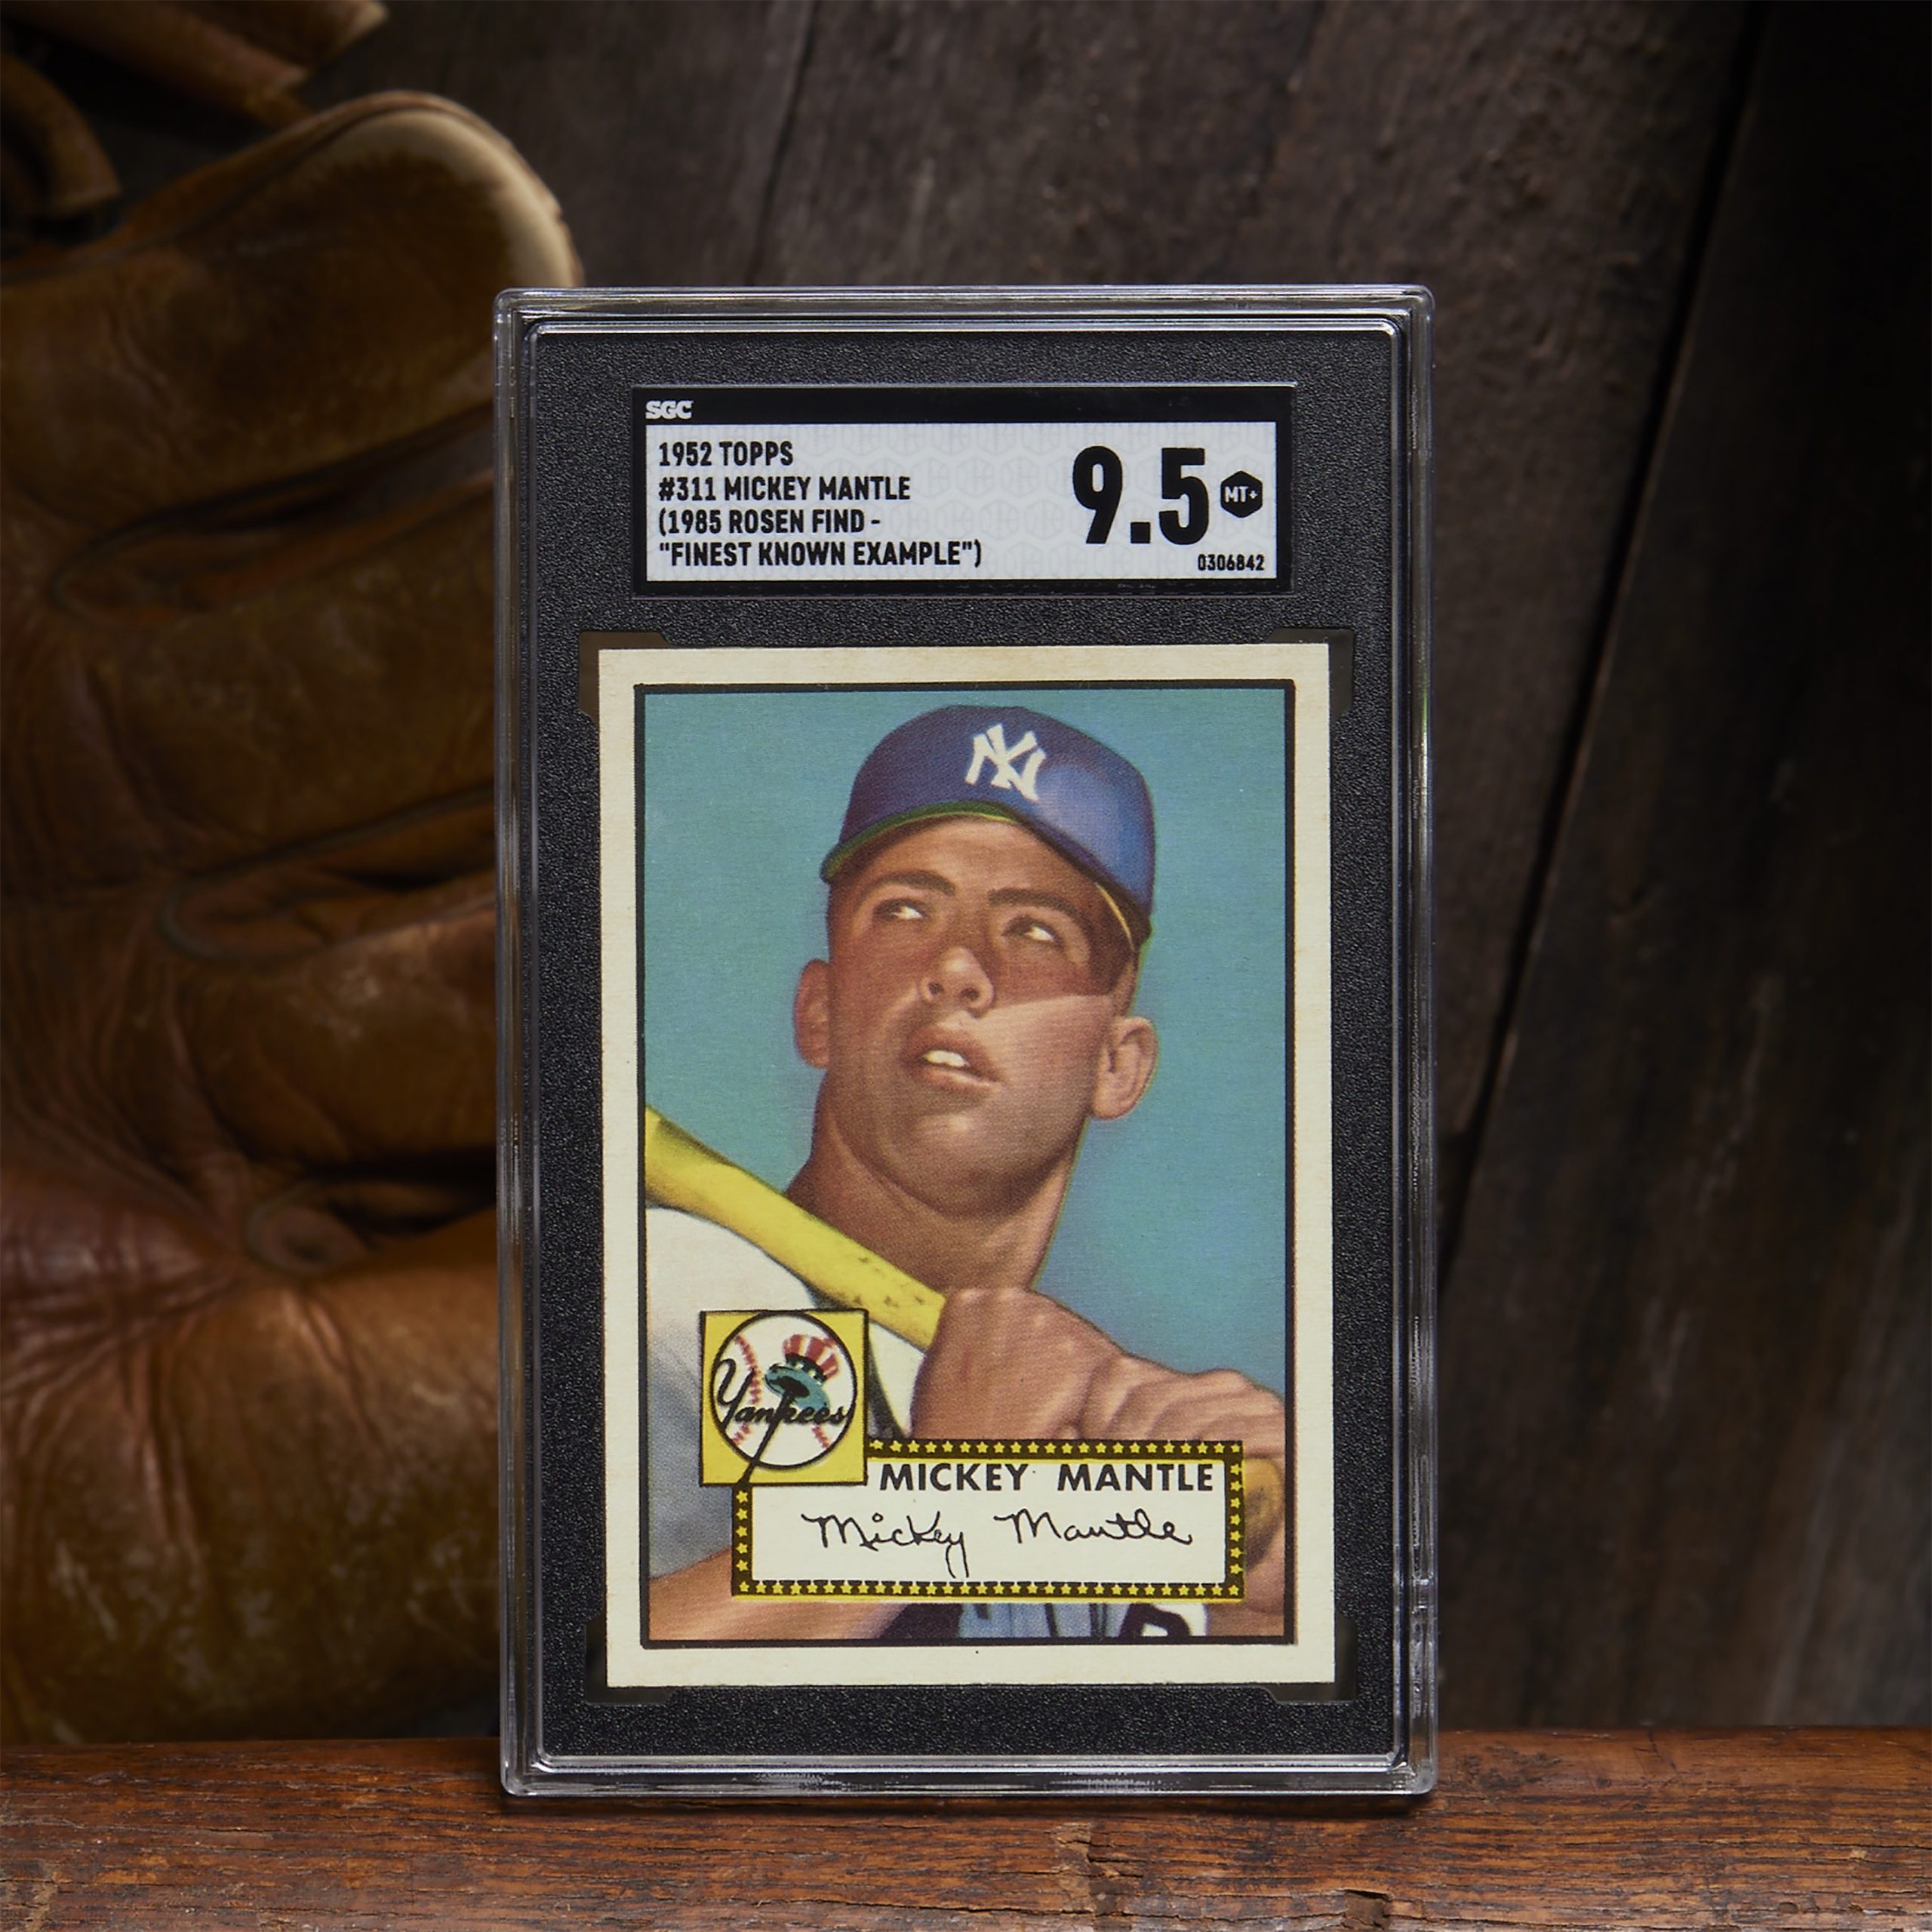 A Mickey Mantle Baseball Card Just Fetched $12.6 Million at